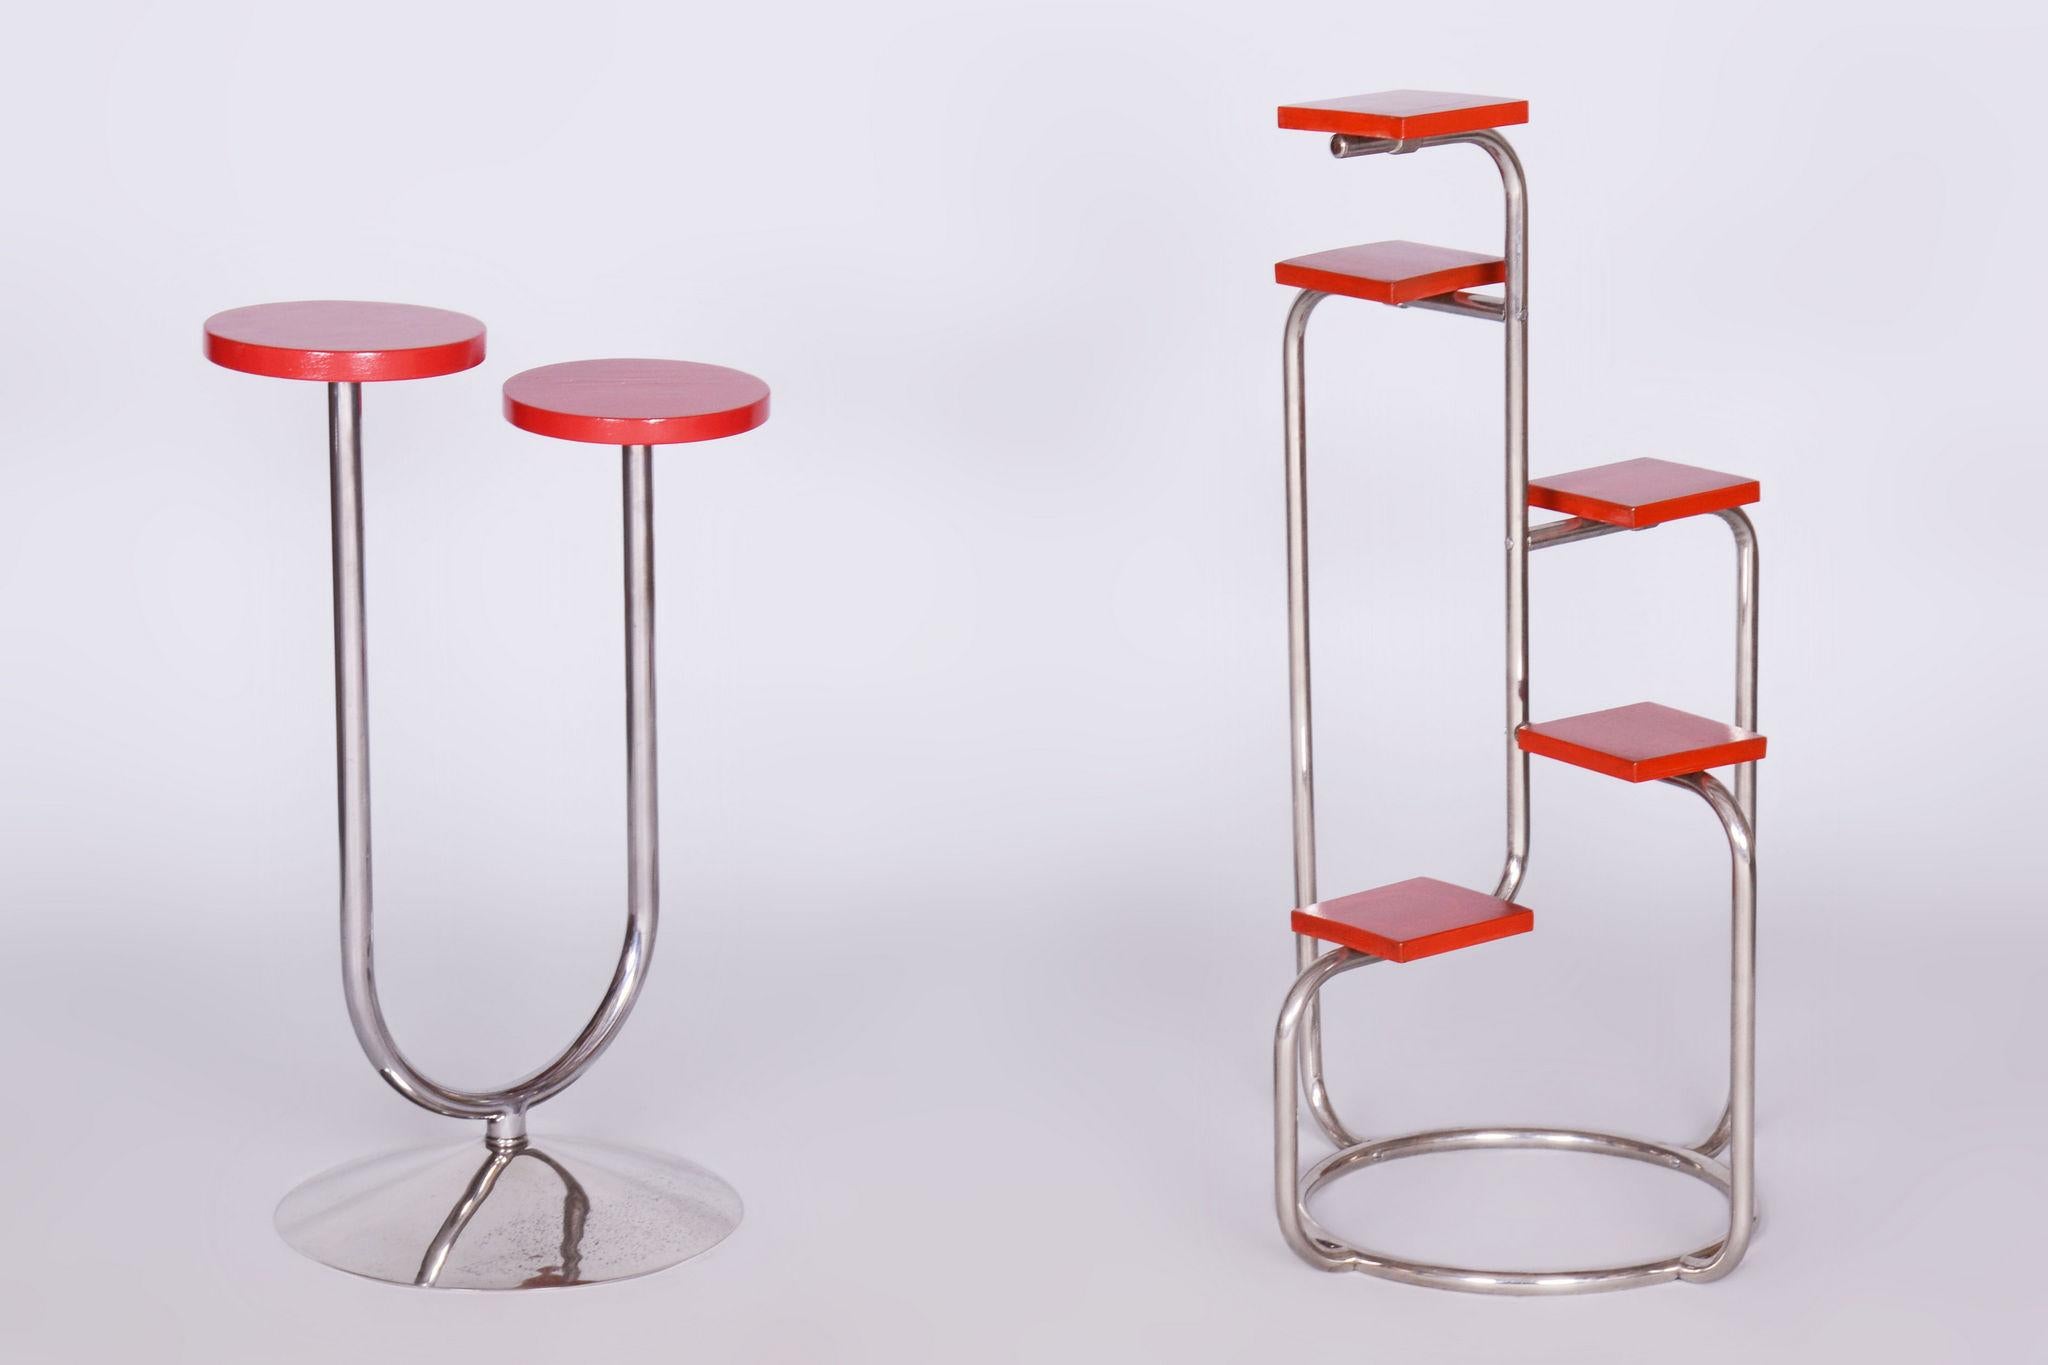 Unusual Bauhaus Chrome Flower Stand, Lacquered Wood, Czechia, 1930s For Sale 3